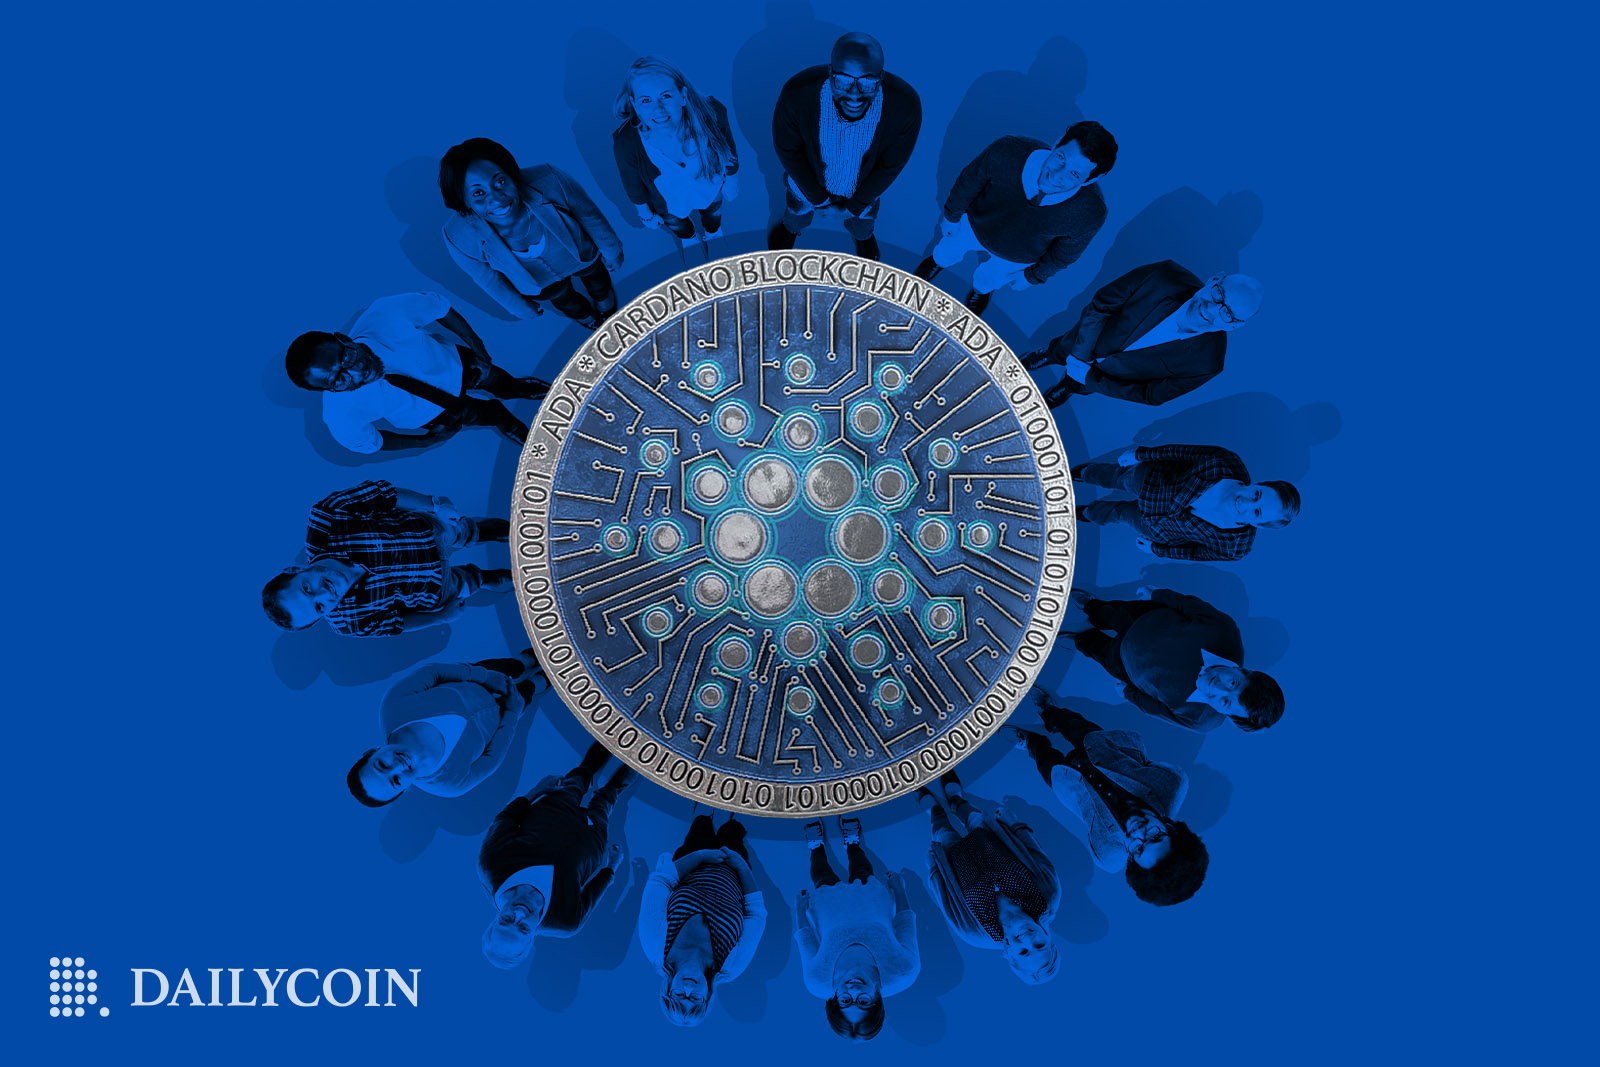 Cardano Community Group of People in a Circle